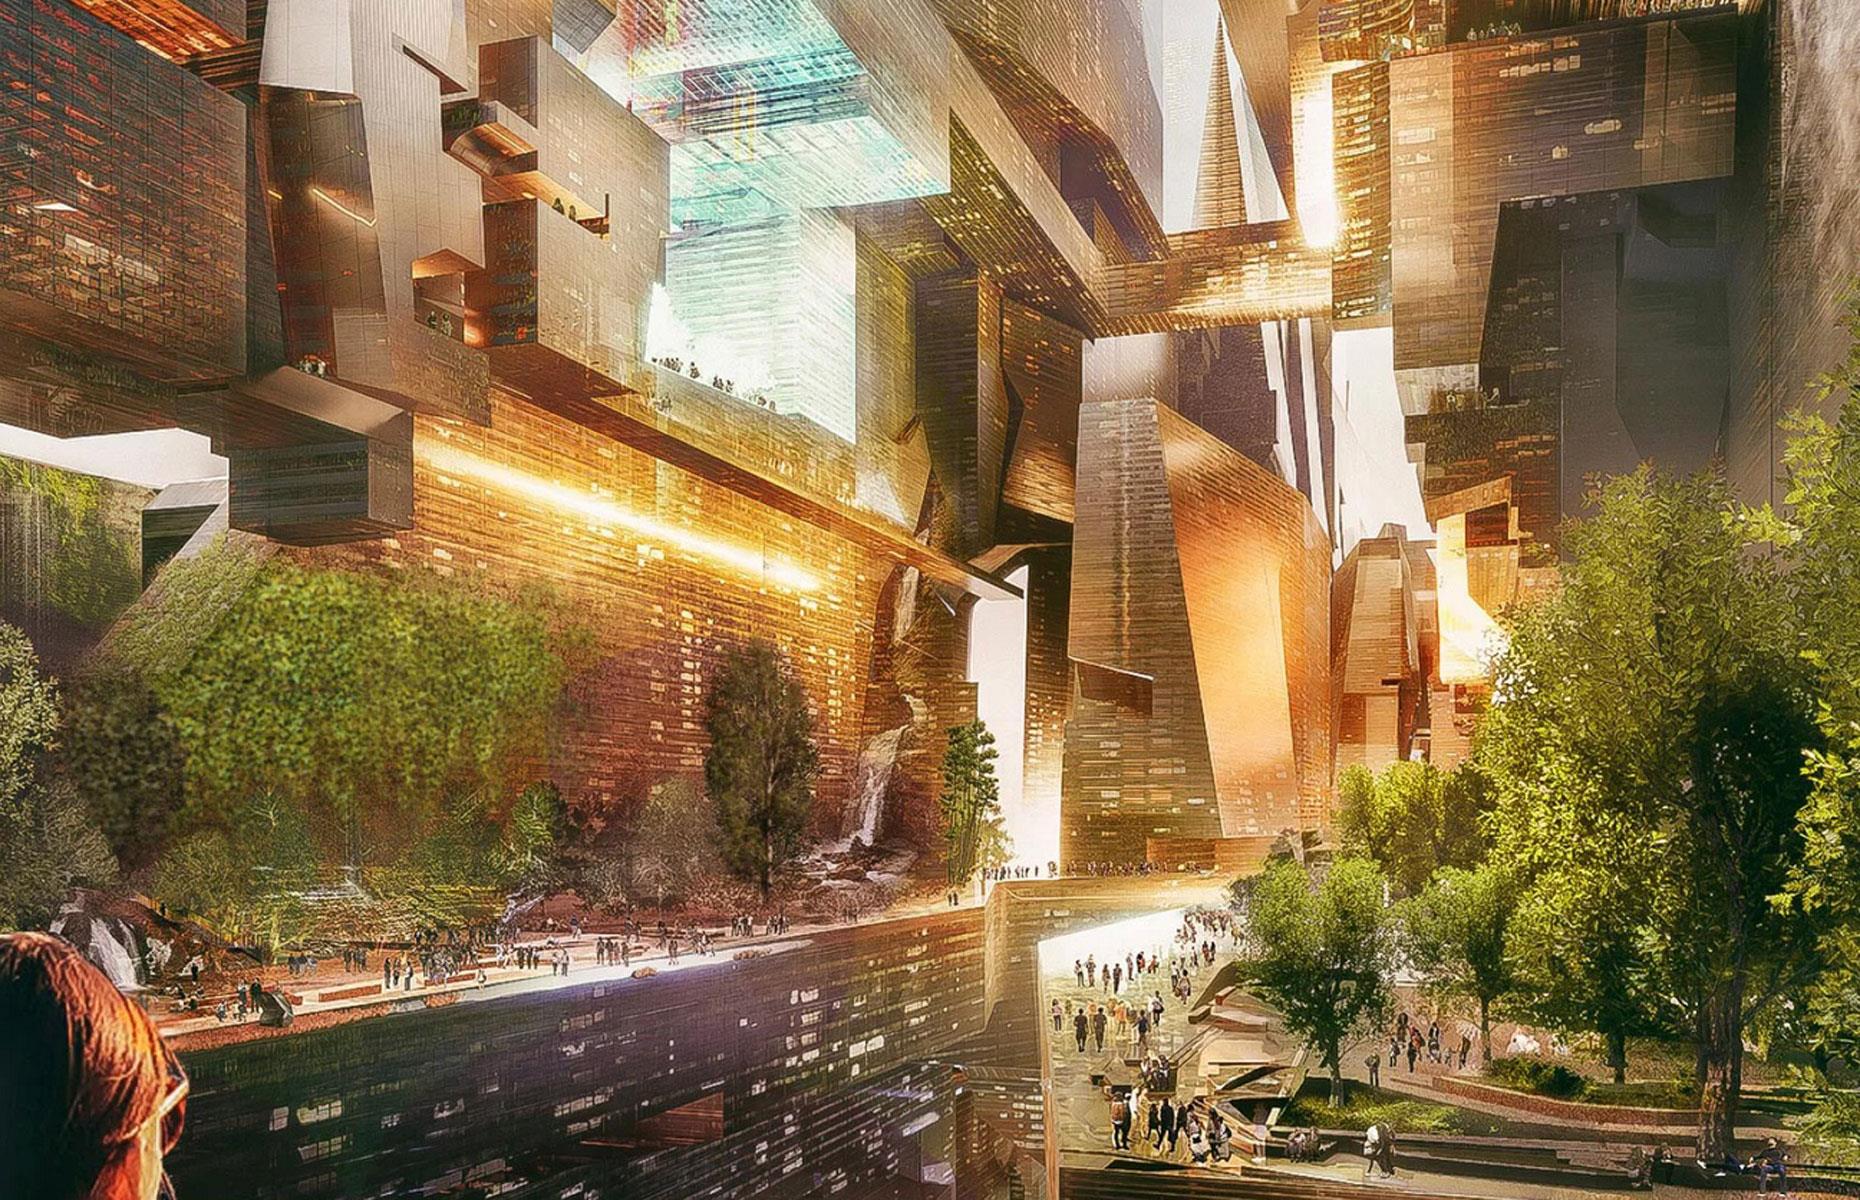 <p>In addition to The Line, three other Neom regions have so far been announced: Oxagon, an advanced port city with floating infrastructure, eco mountain resort Trojena and Sindalah, a sustainable luxury island resort destination in the Red Sea. Rumored to have been designed by US architectural studio Morphosis, The Line is the most jaw-dropping of the planned regions and will have a population of nine million by 2045 living more or less vertically, if everything goes to plan. All local amenities will be accessed within a five-minute walk, while residents will never be further than two minutes away from nature.</p>